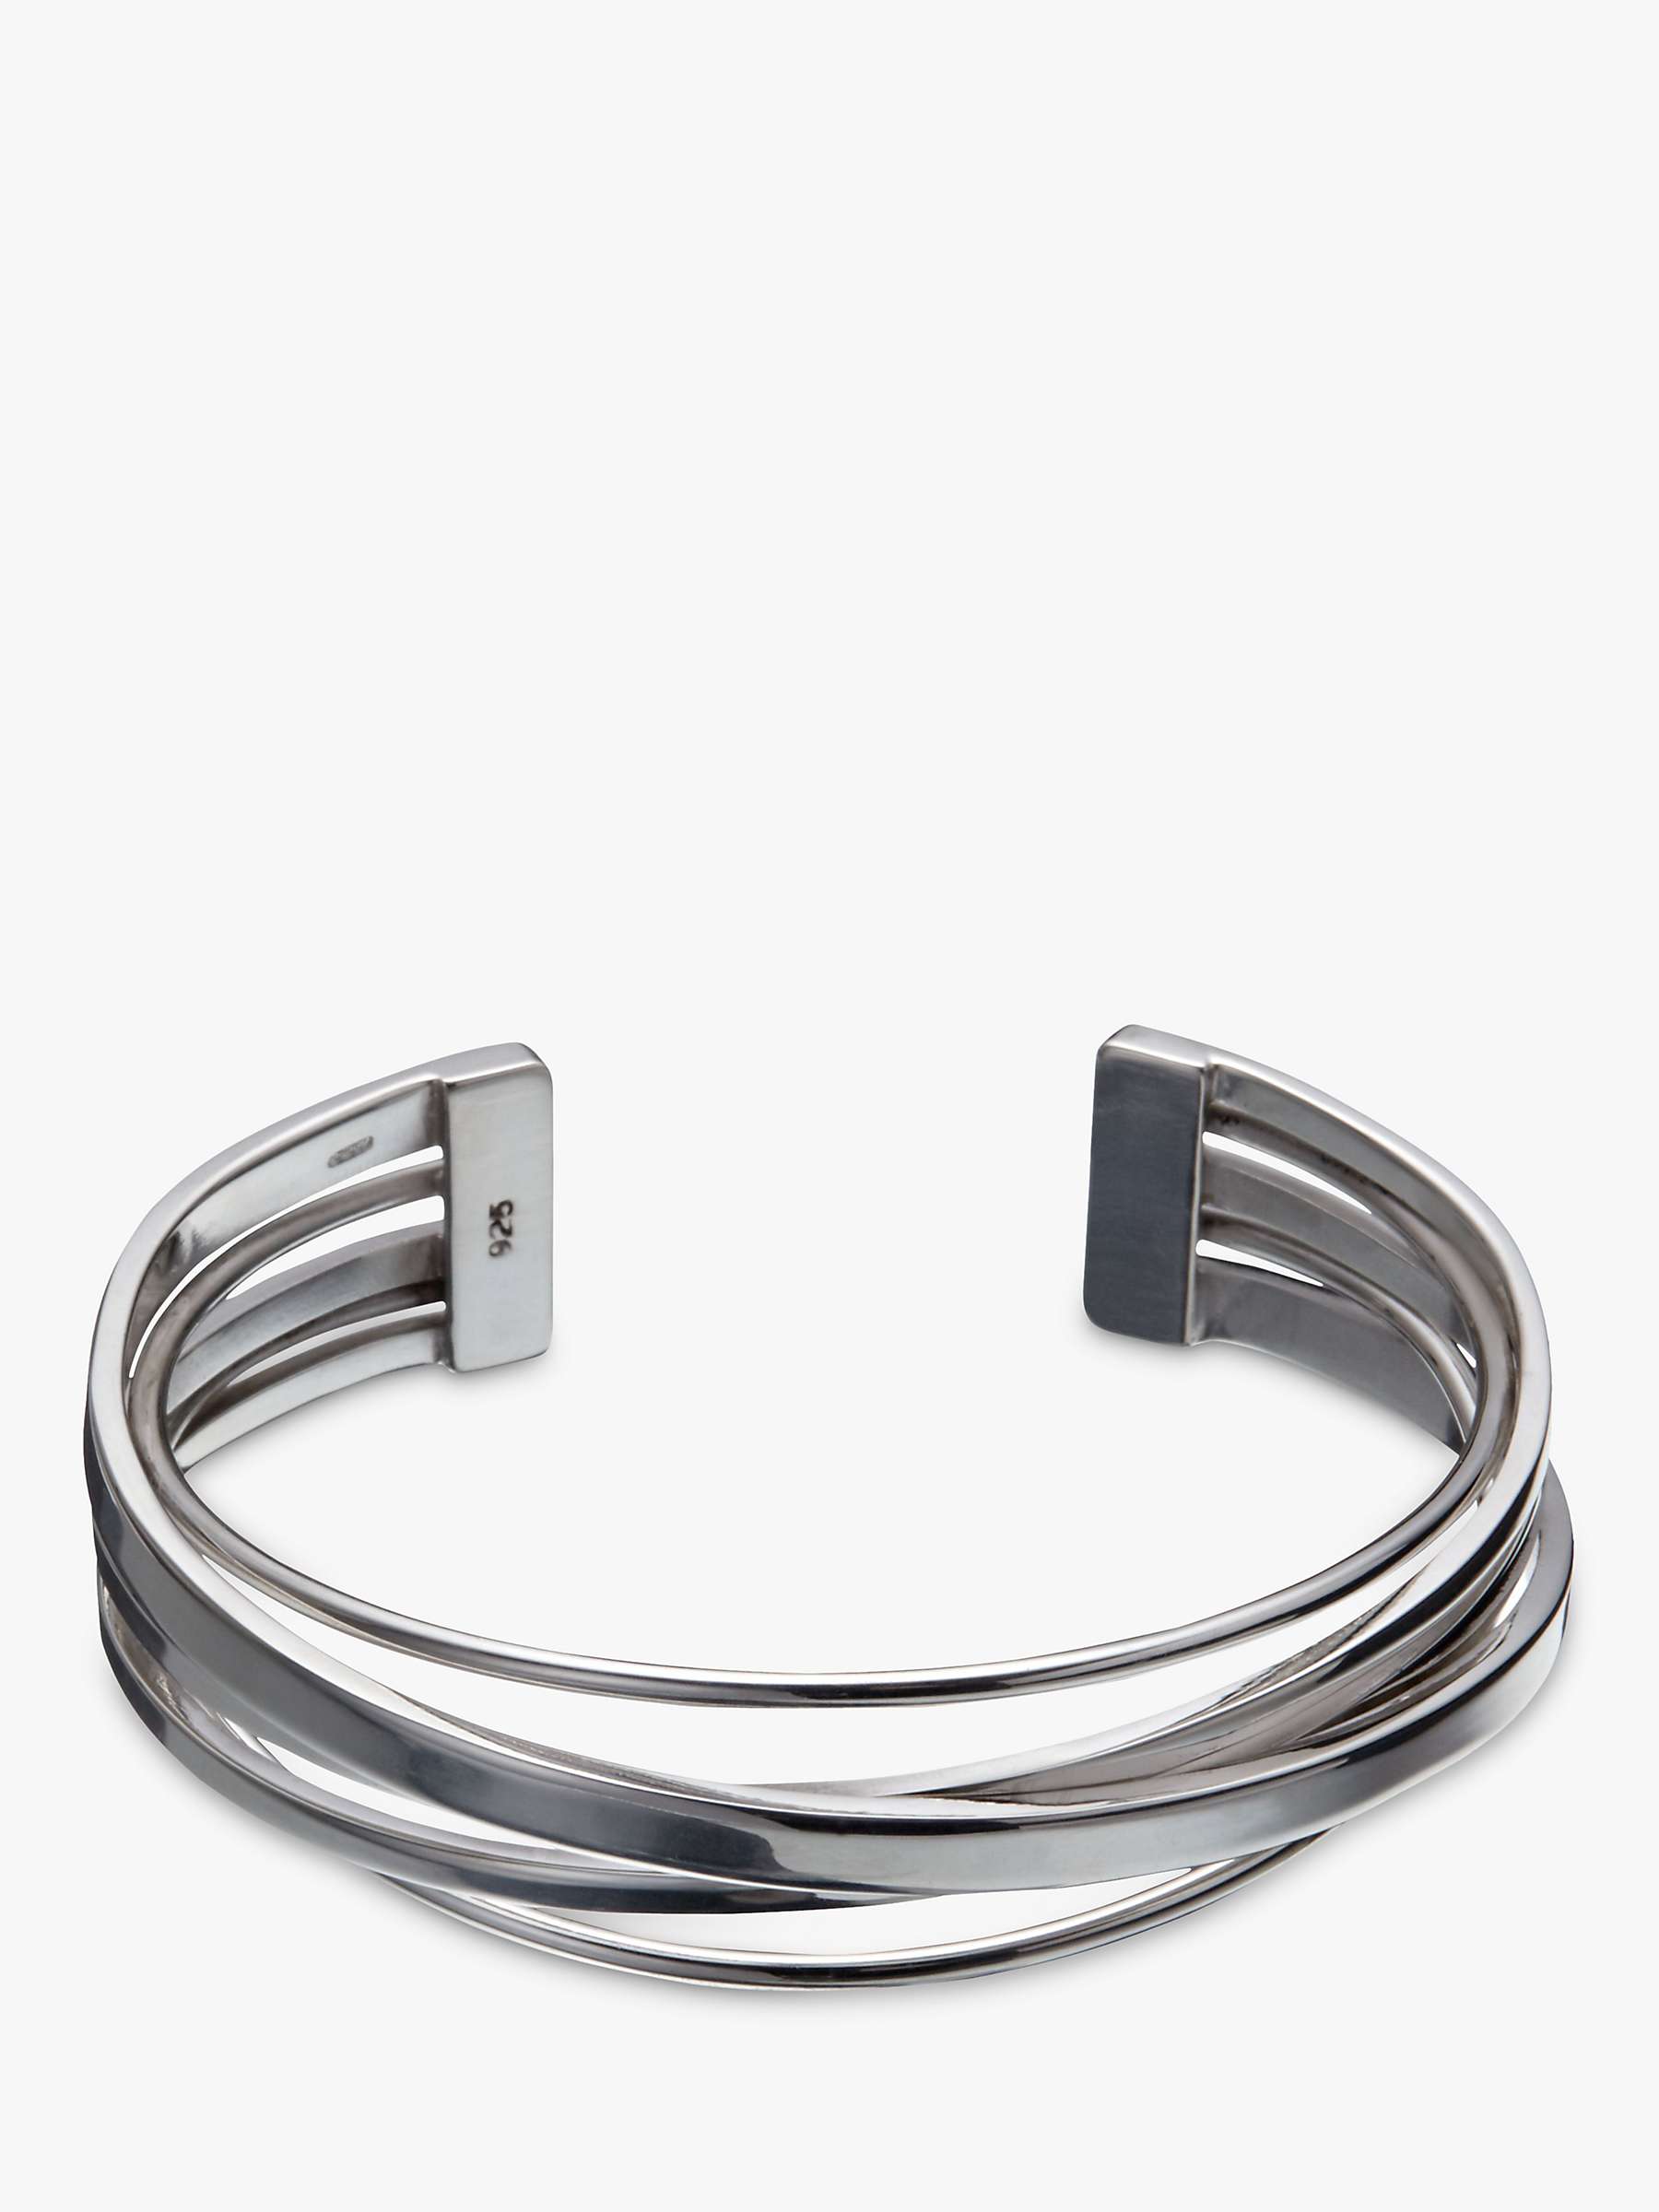 Buy Andea Sterling Silver Multi-Line Cuff, Silver Online at johnlewis.com